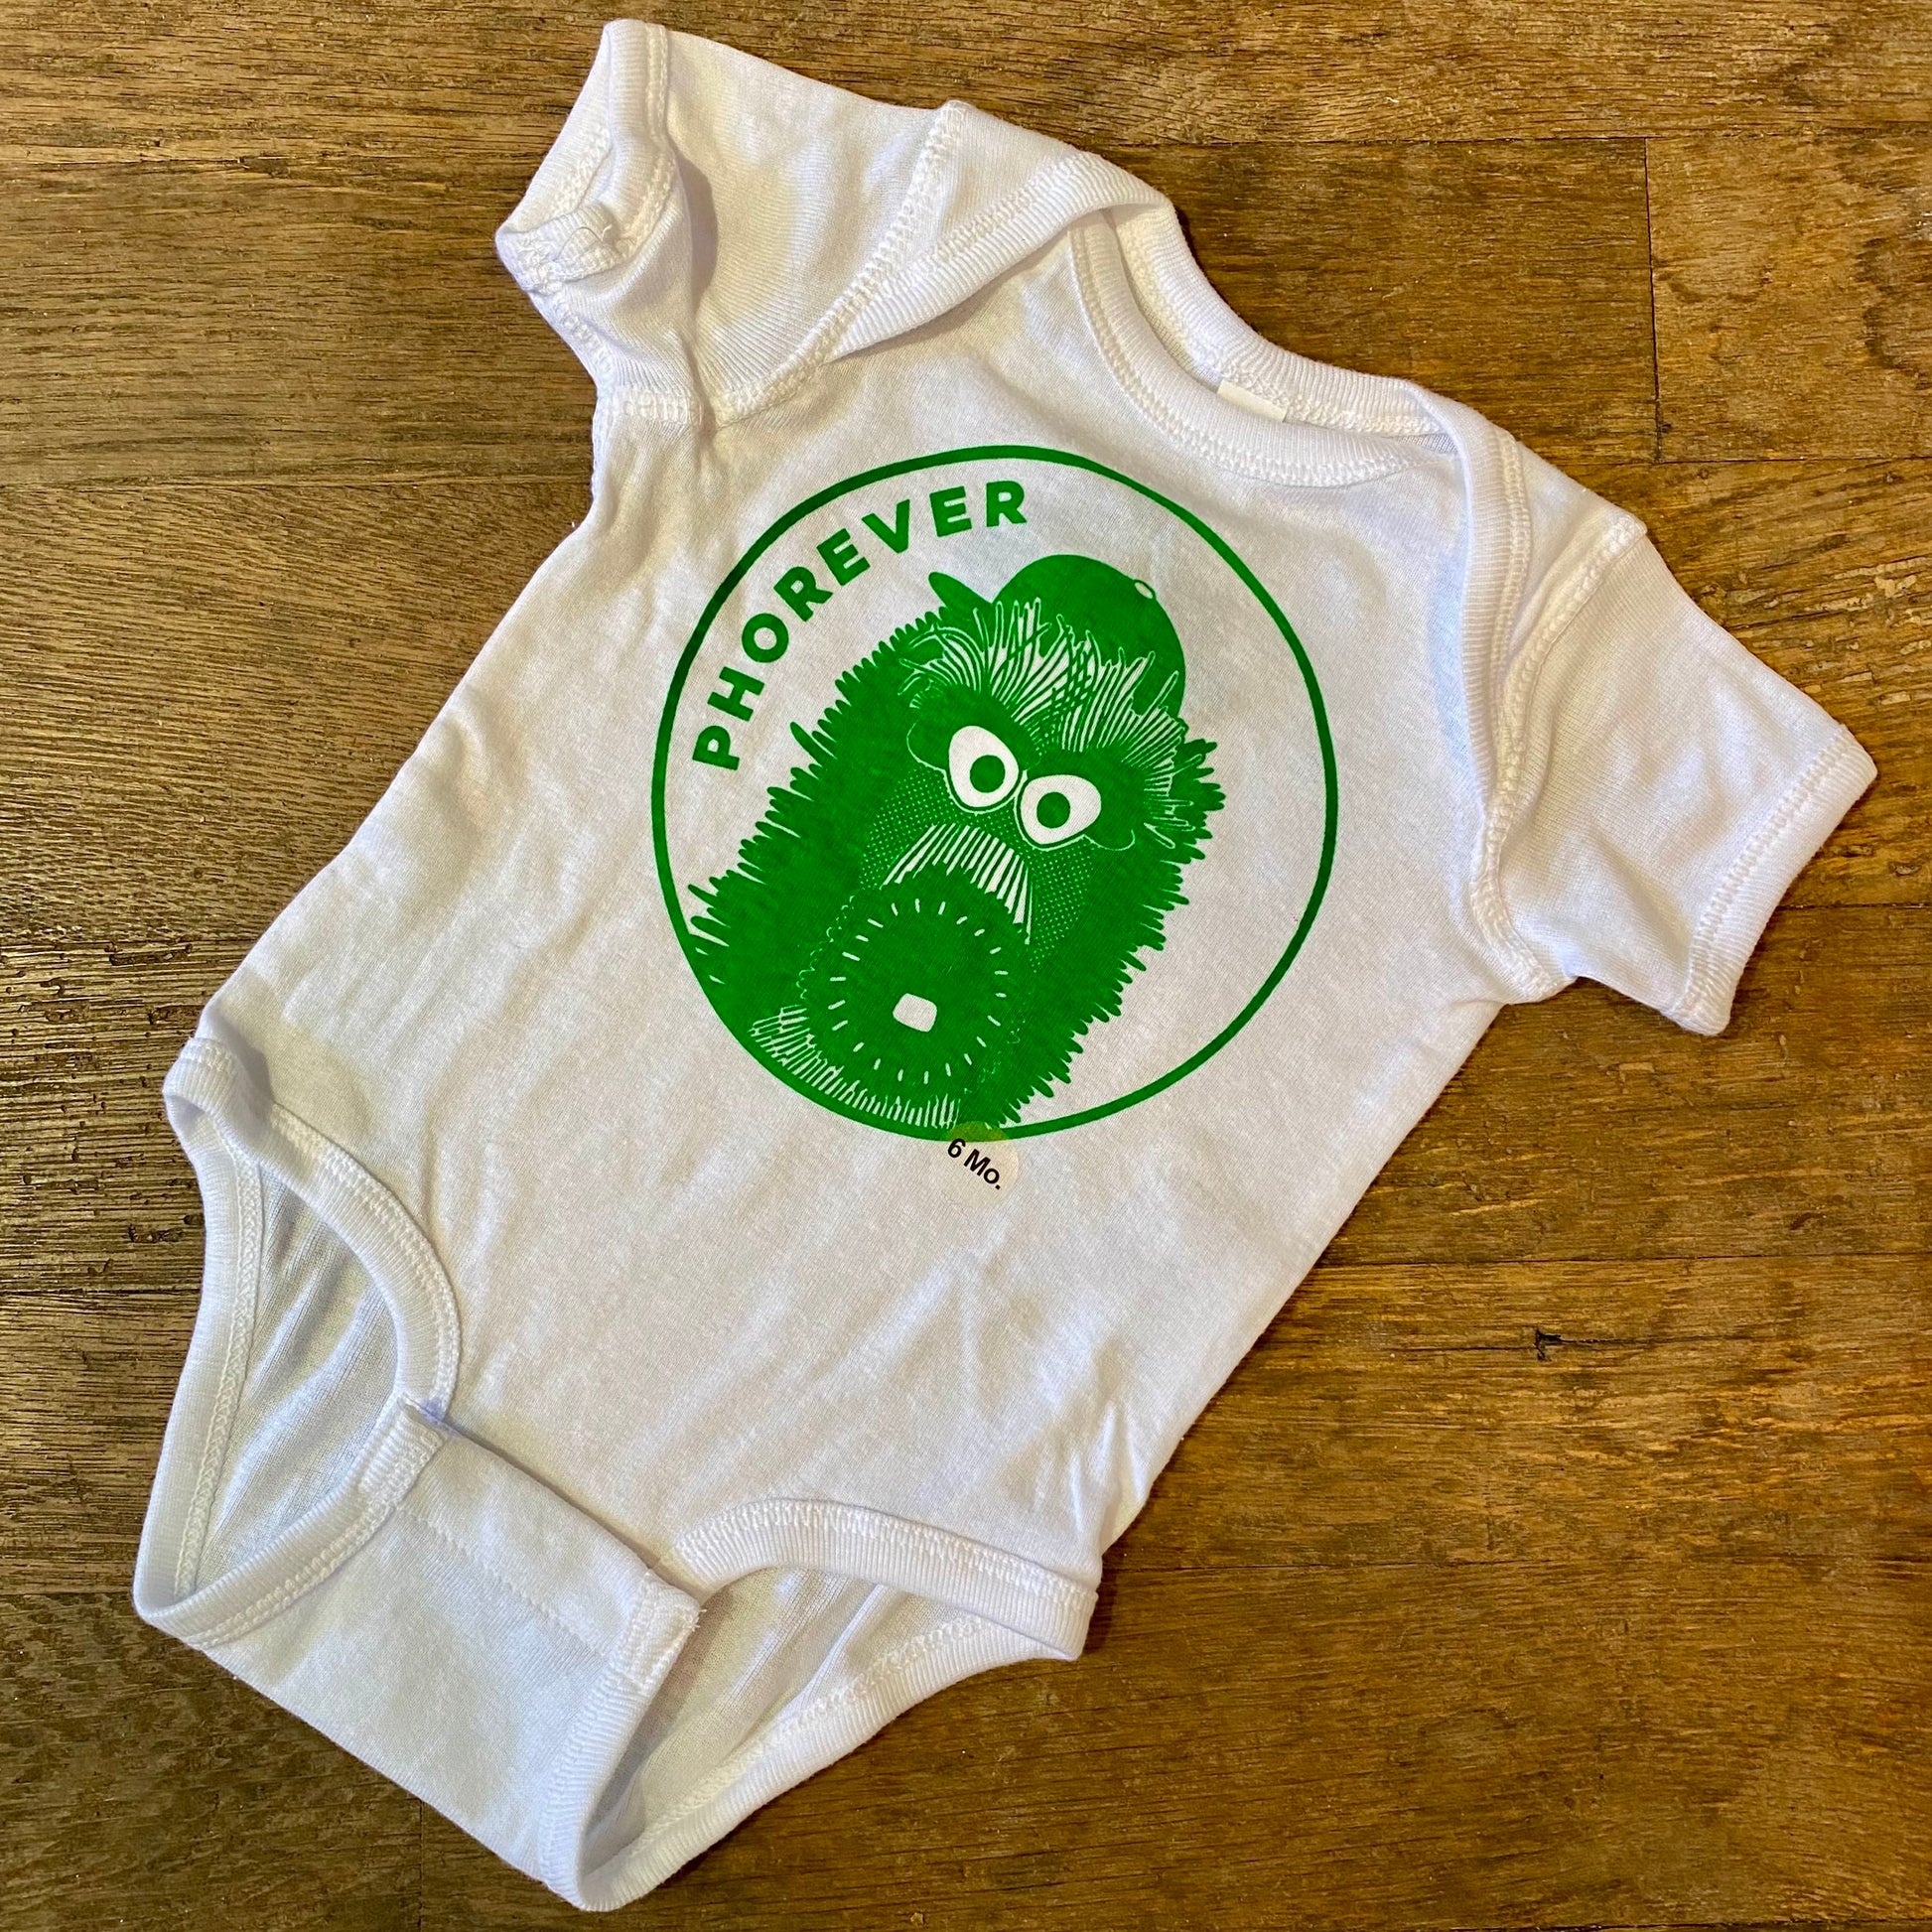 White Phanatic Phorever baby onesie with green "Phorever Phan" kiwi design on a wooden background designed by exit343design.